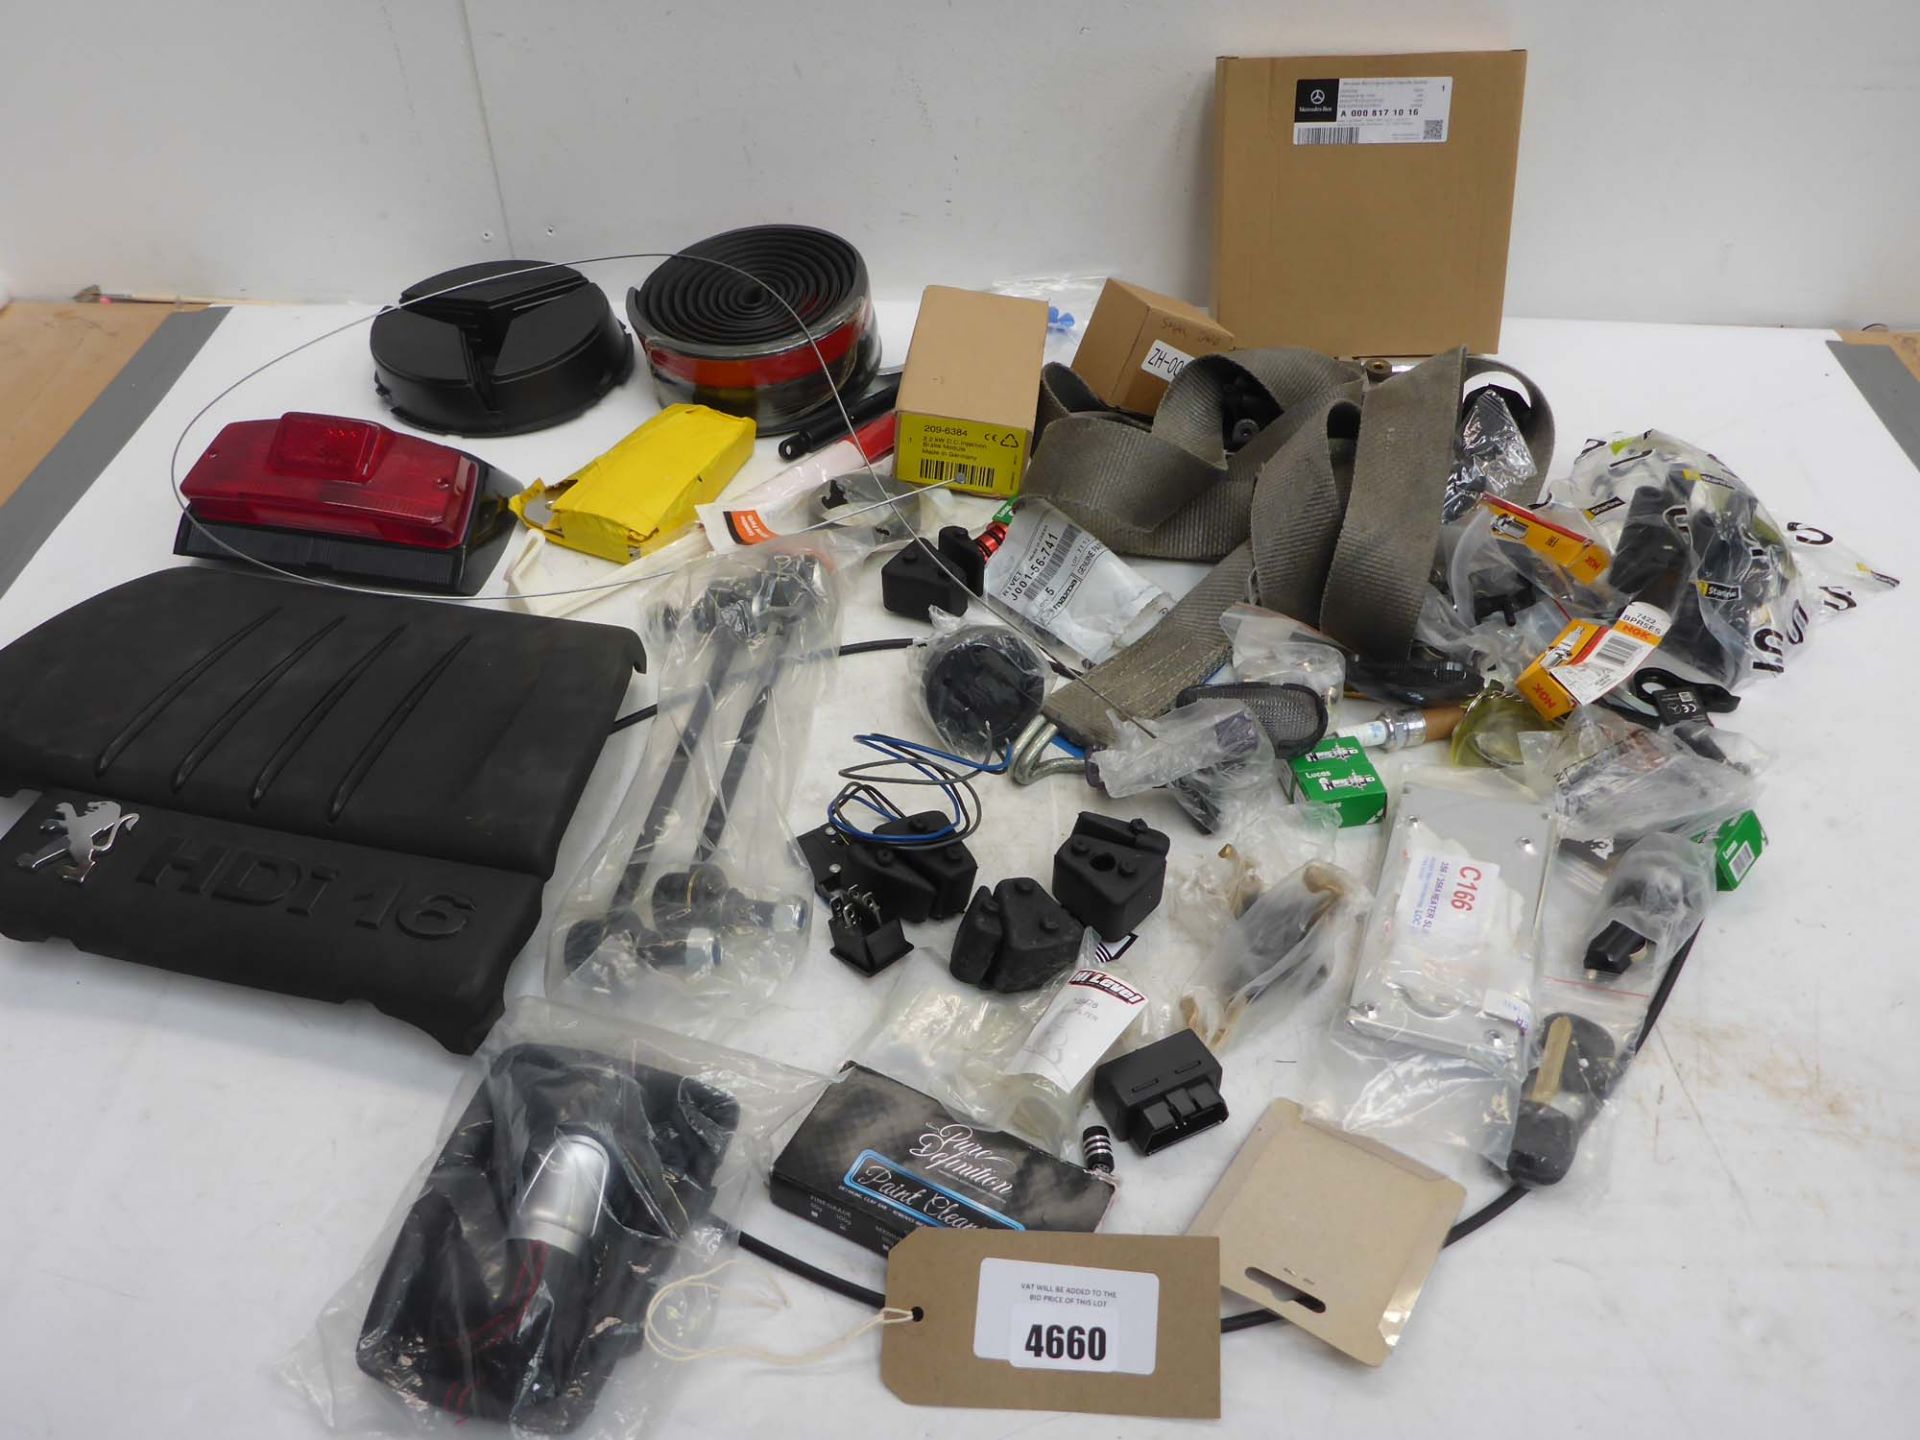 Car spare parts including stabilizers, light unit, injection brake module, spark plugs, seal,